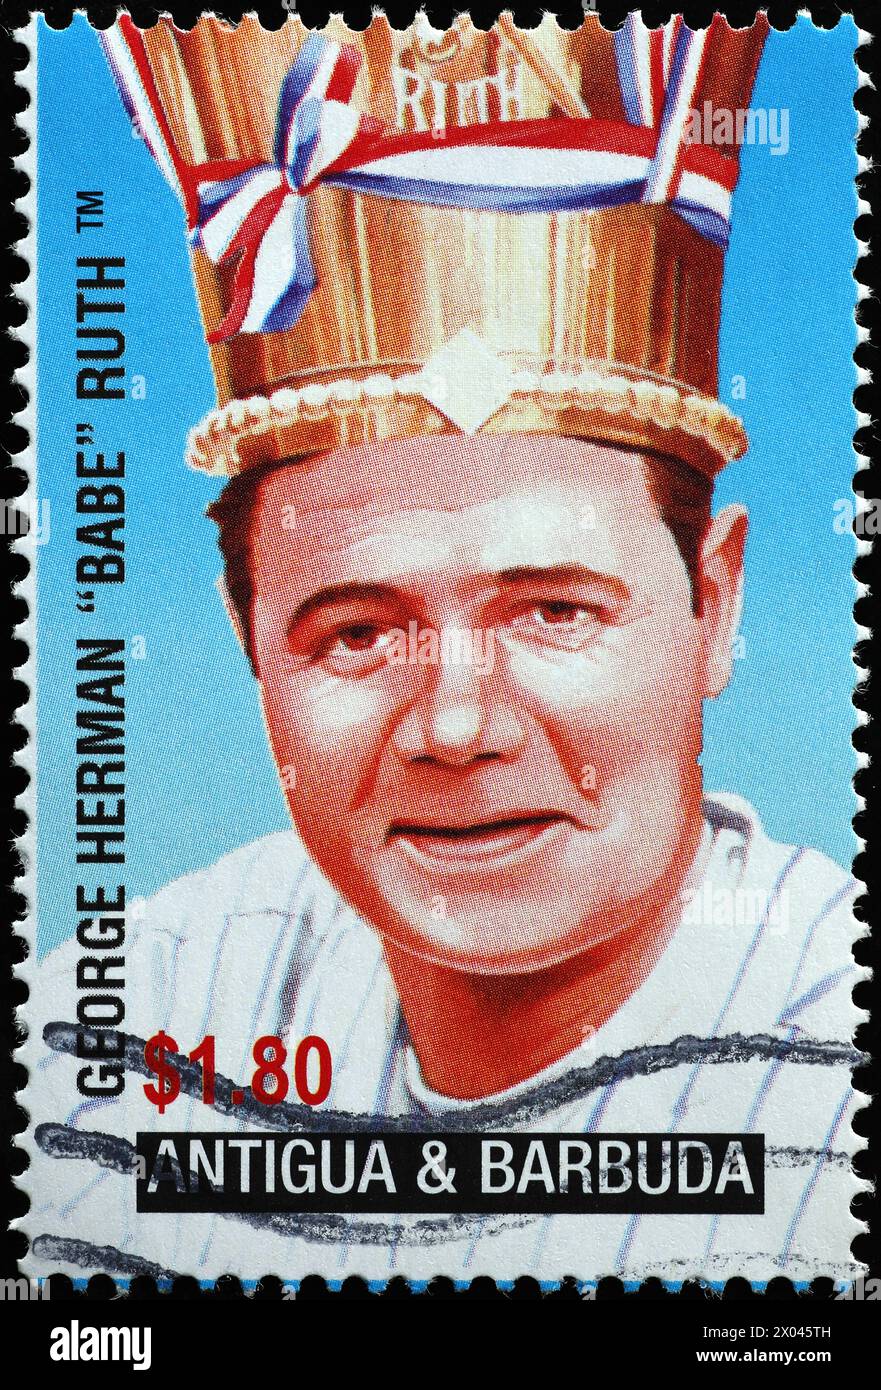 Babe Ruth wearing a crown on postage stamp Stock Photo